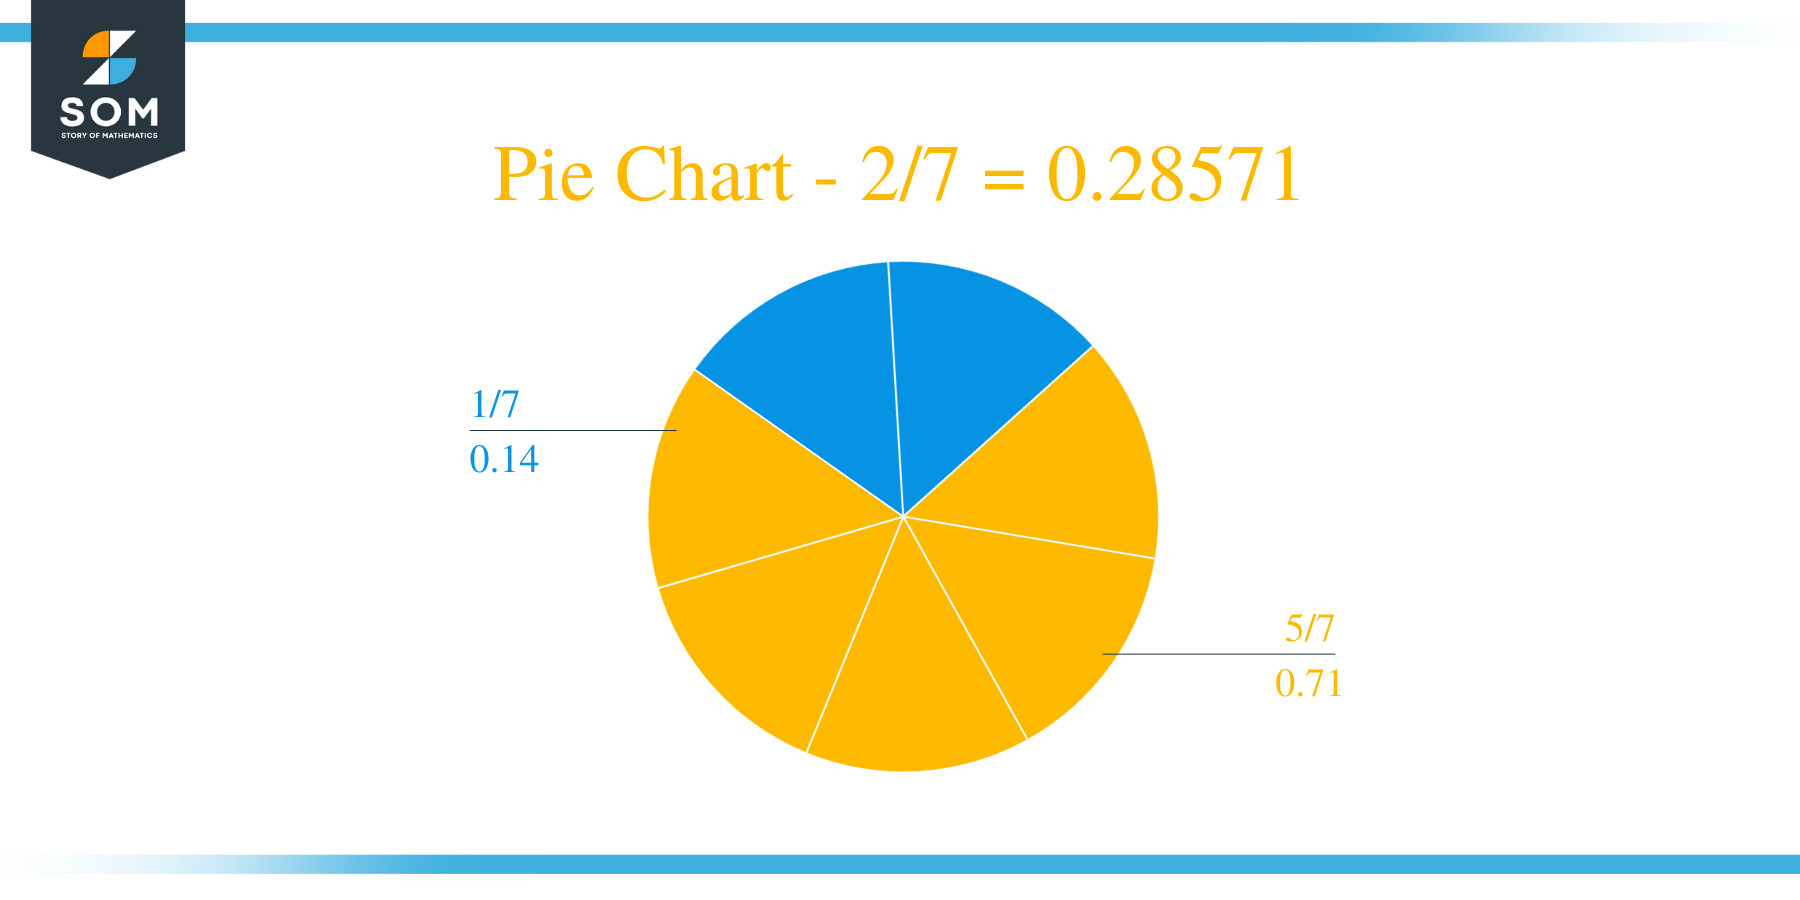 Pie Chart 2 by 7 Long Division Method